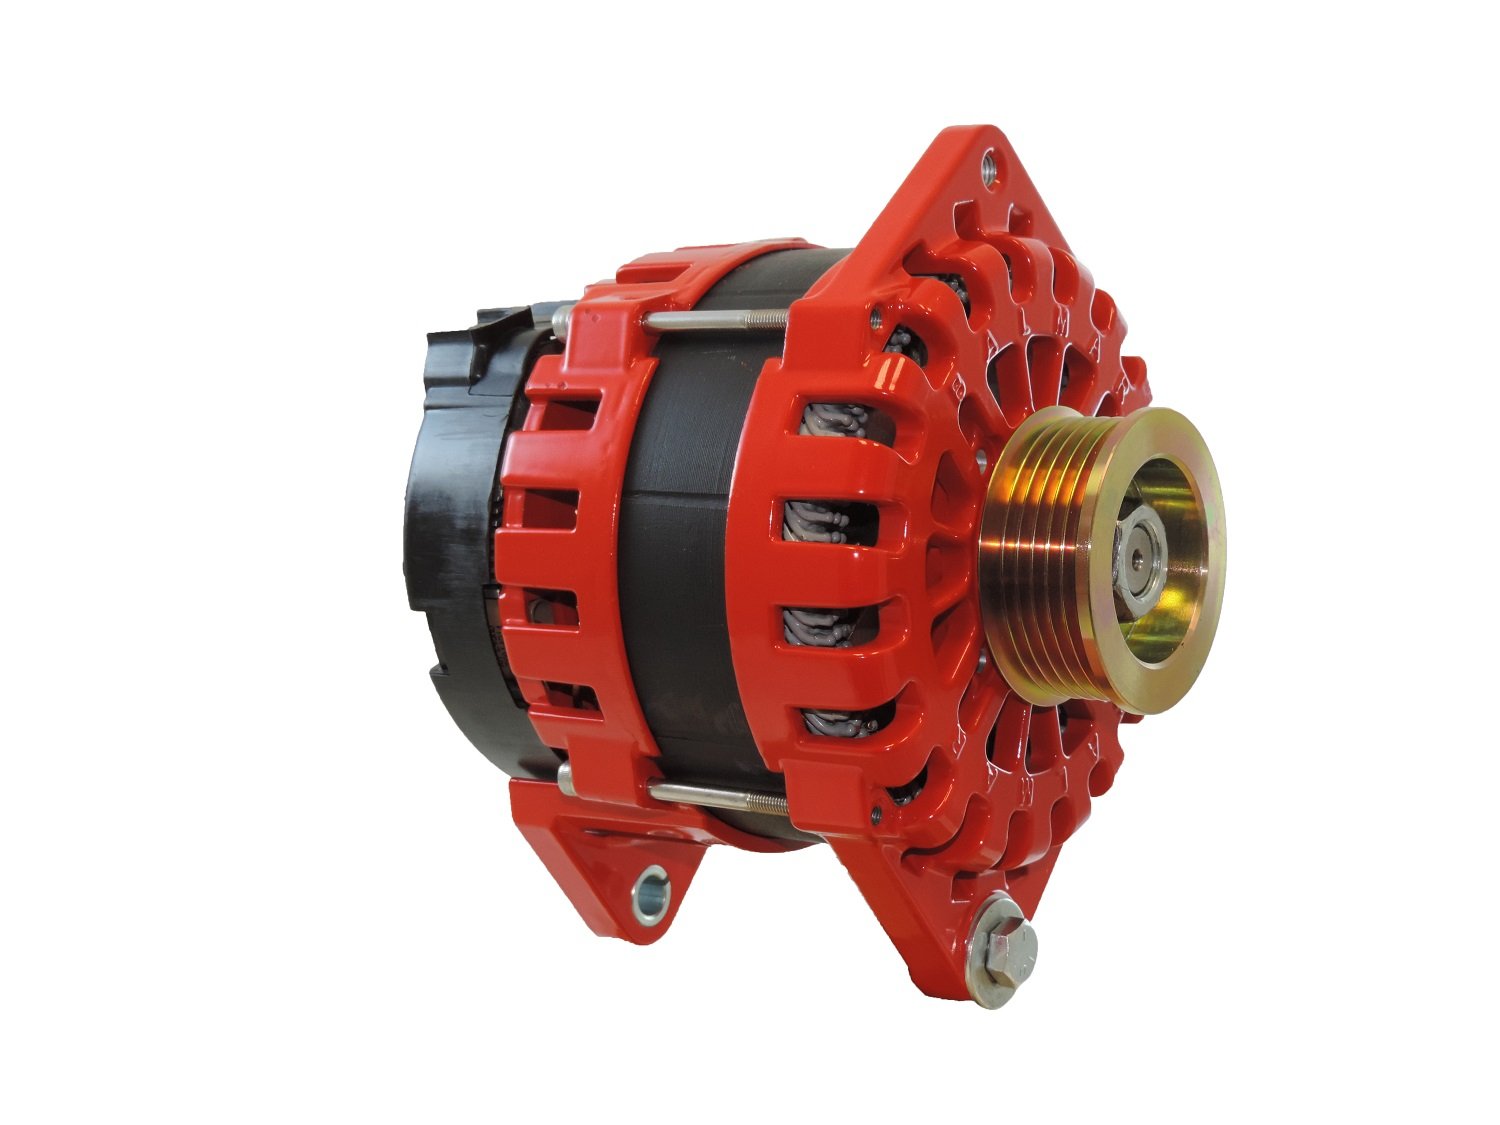 Does the Balmar XT-DF-250-K6 Alternator come with an isolated ground?